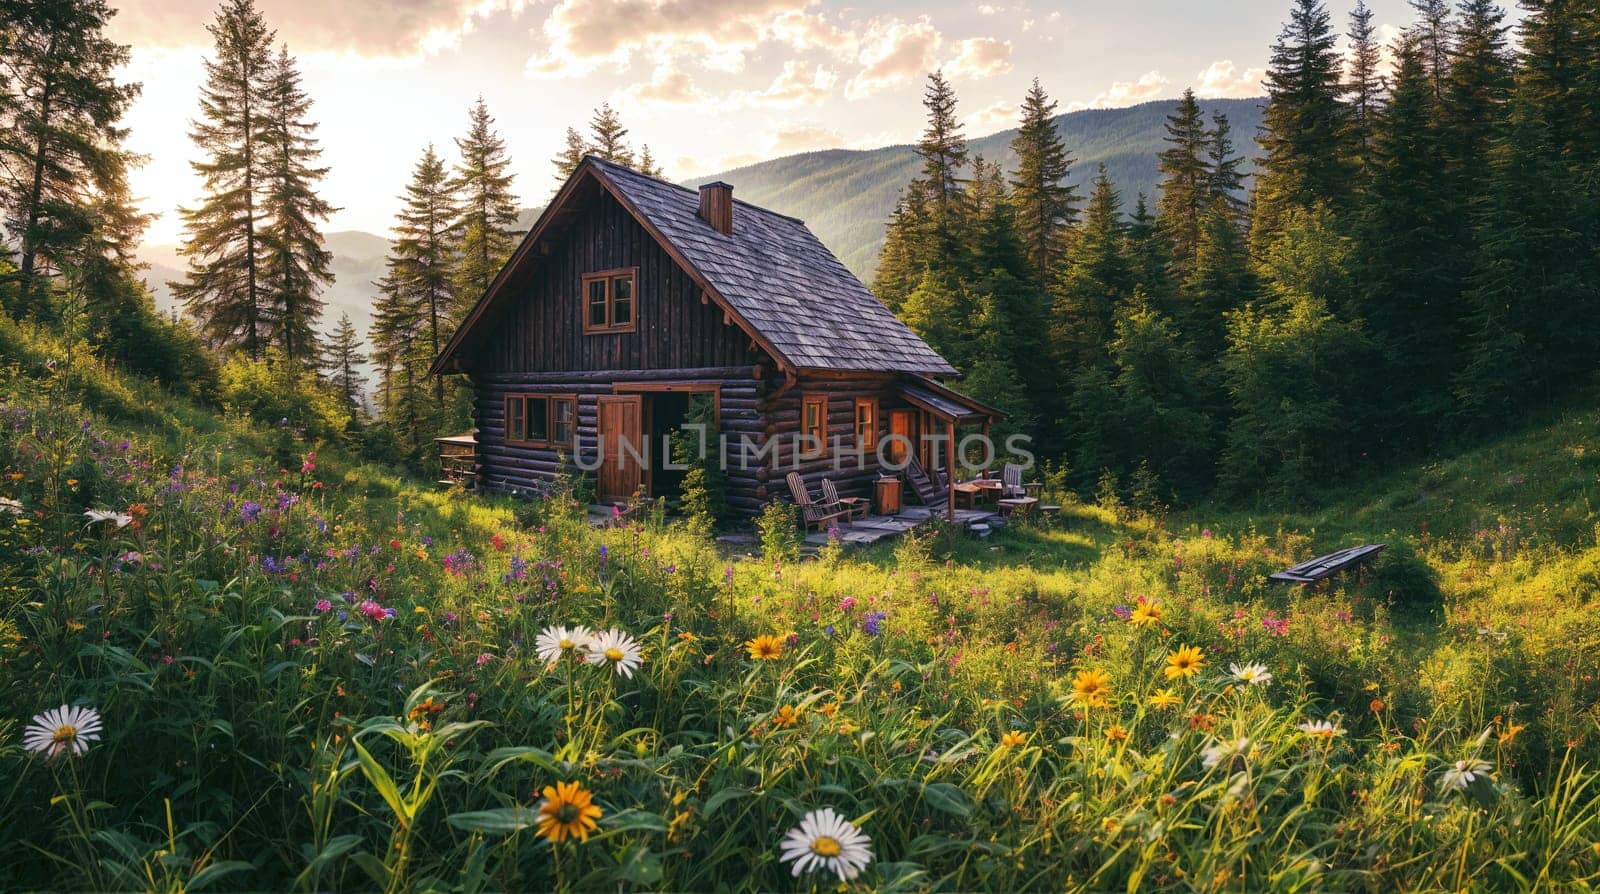 Serene Sunset Over A Rustic Cabin In The Lush Mountain Forest by chrisroll